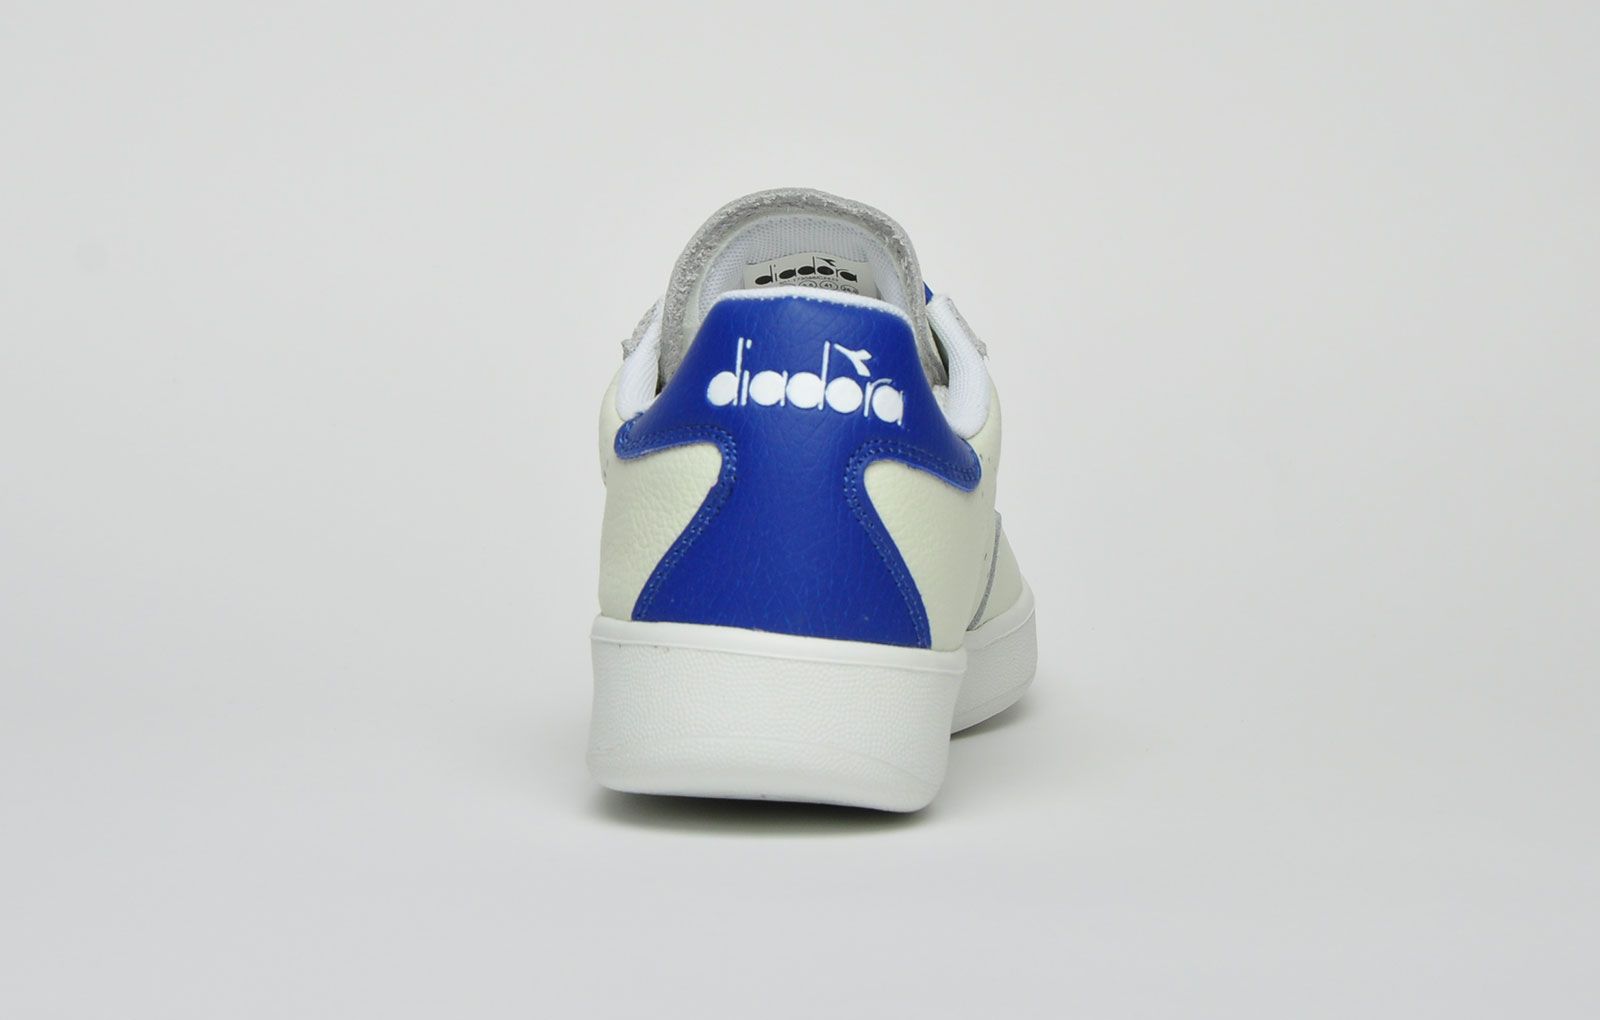 <p>Mixing sporty and urban fashion, these Diadora Borg Elite men’s leather trainers are made from full grain leather with brand identity delivered by the way of pin punch detailing to the side upper. The vintage textured outsole and comfortable inner lining give this classic a versatile and stylish look, making this shoe a must have for the coming seasons. <b></b></p><p><b><br> </b></p><p class=